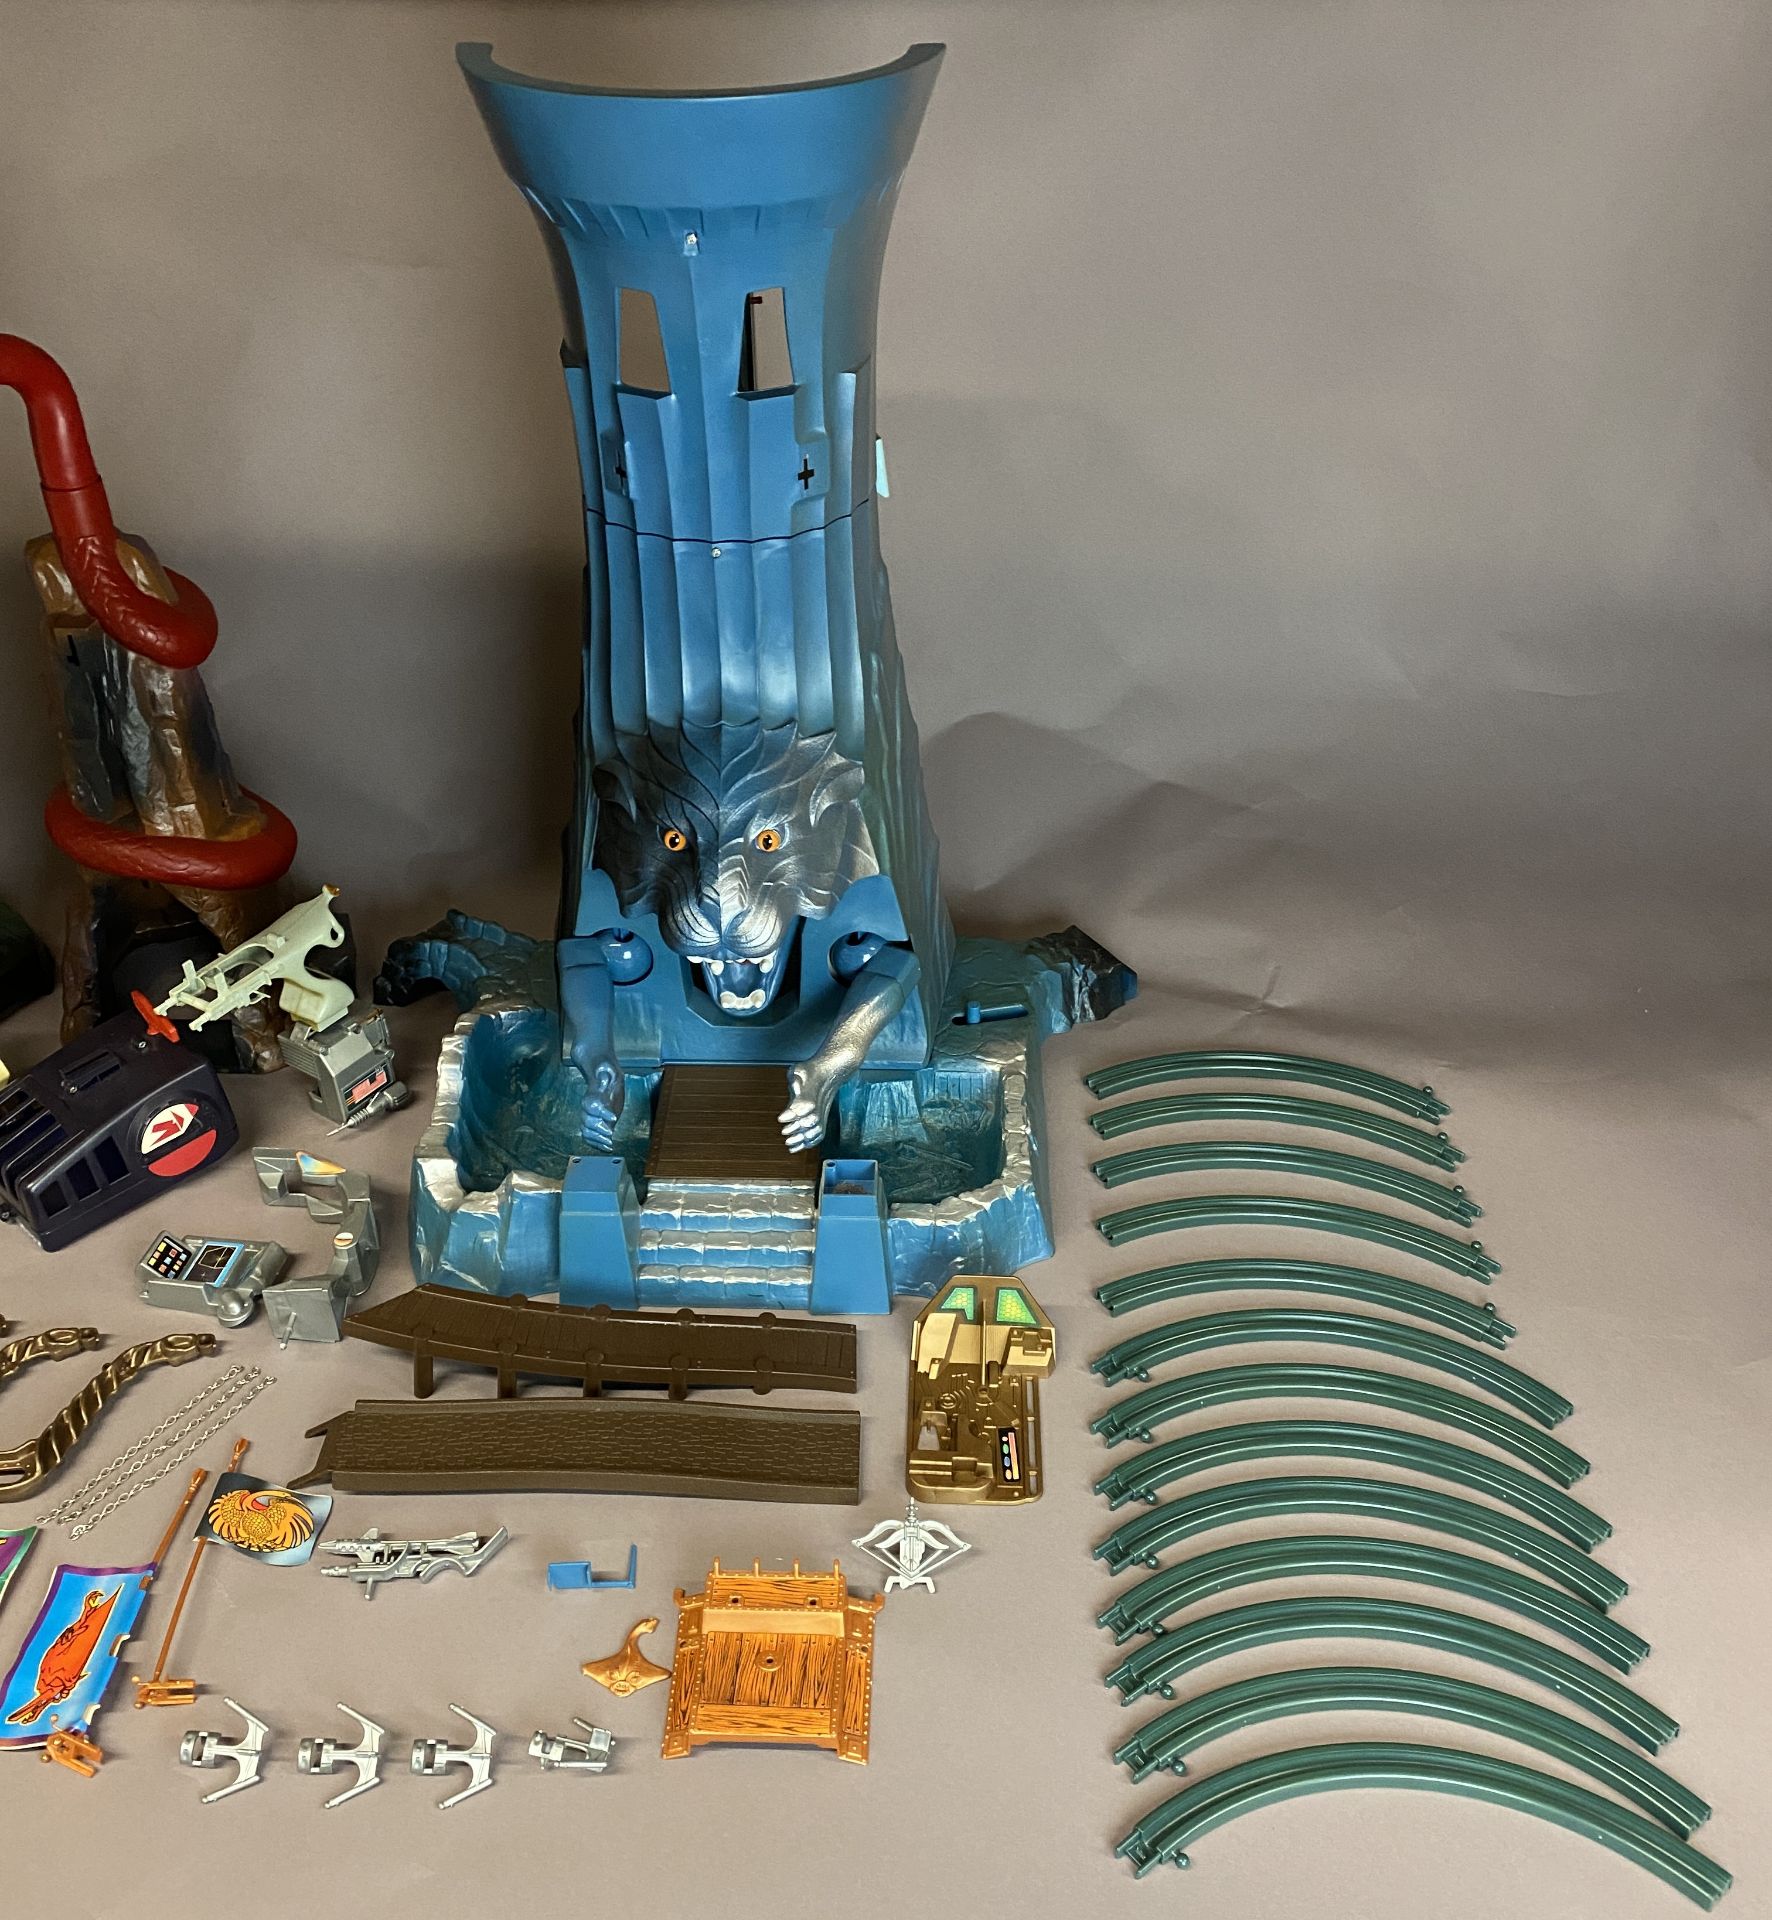 ETERNIA - Vintage Masters of the Universe Playset and Original Box (MOTU) - Appears to be complete - Image 76 of 125